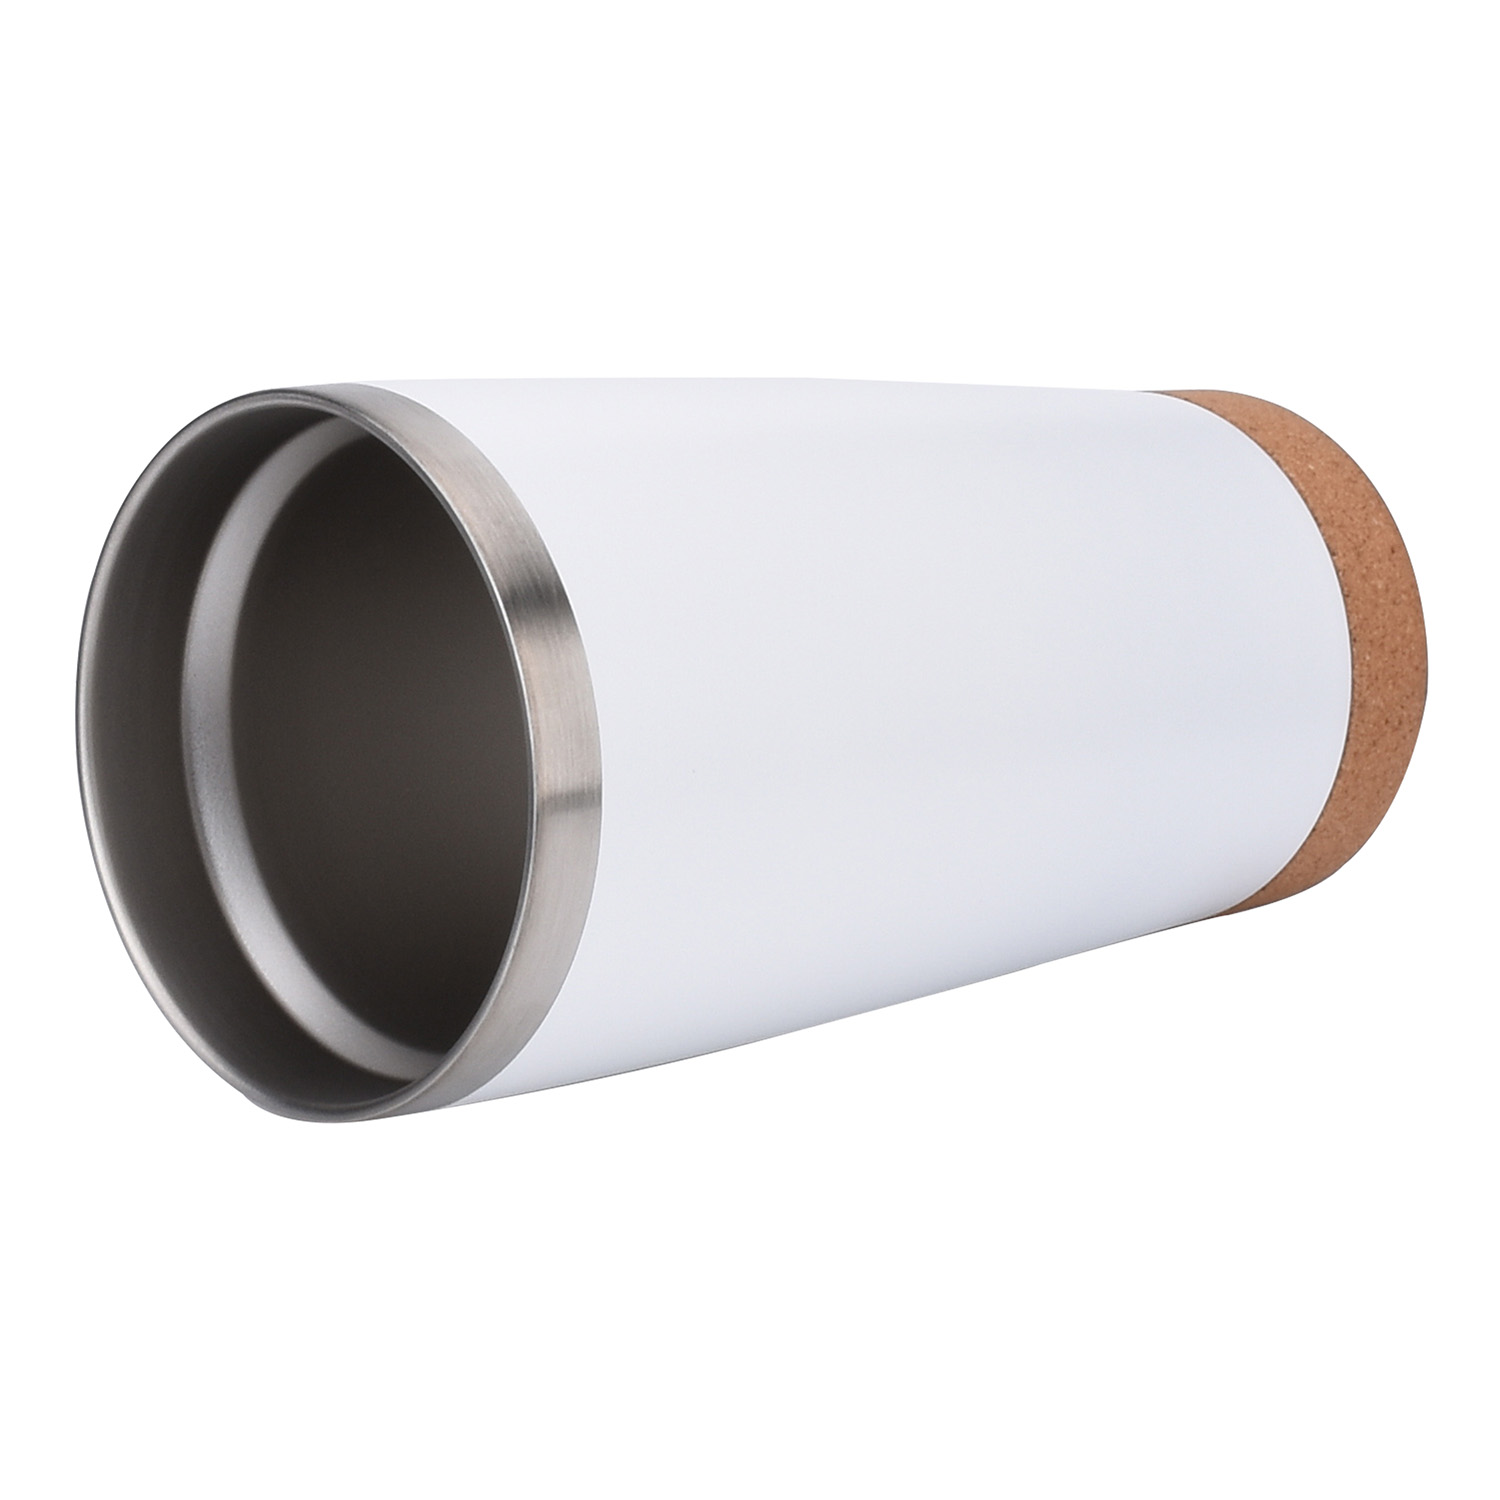 https://www.waterbottle.tech/wp-content/uploads/2022/12/Dishwasher-Safe-Copper-Lined-Tumbler-with-Cork-Bottom-s212059-3.jpg